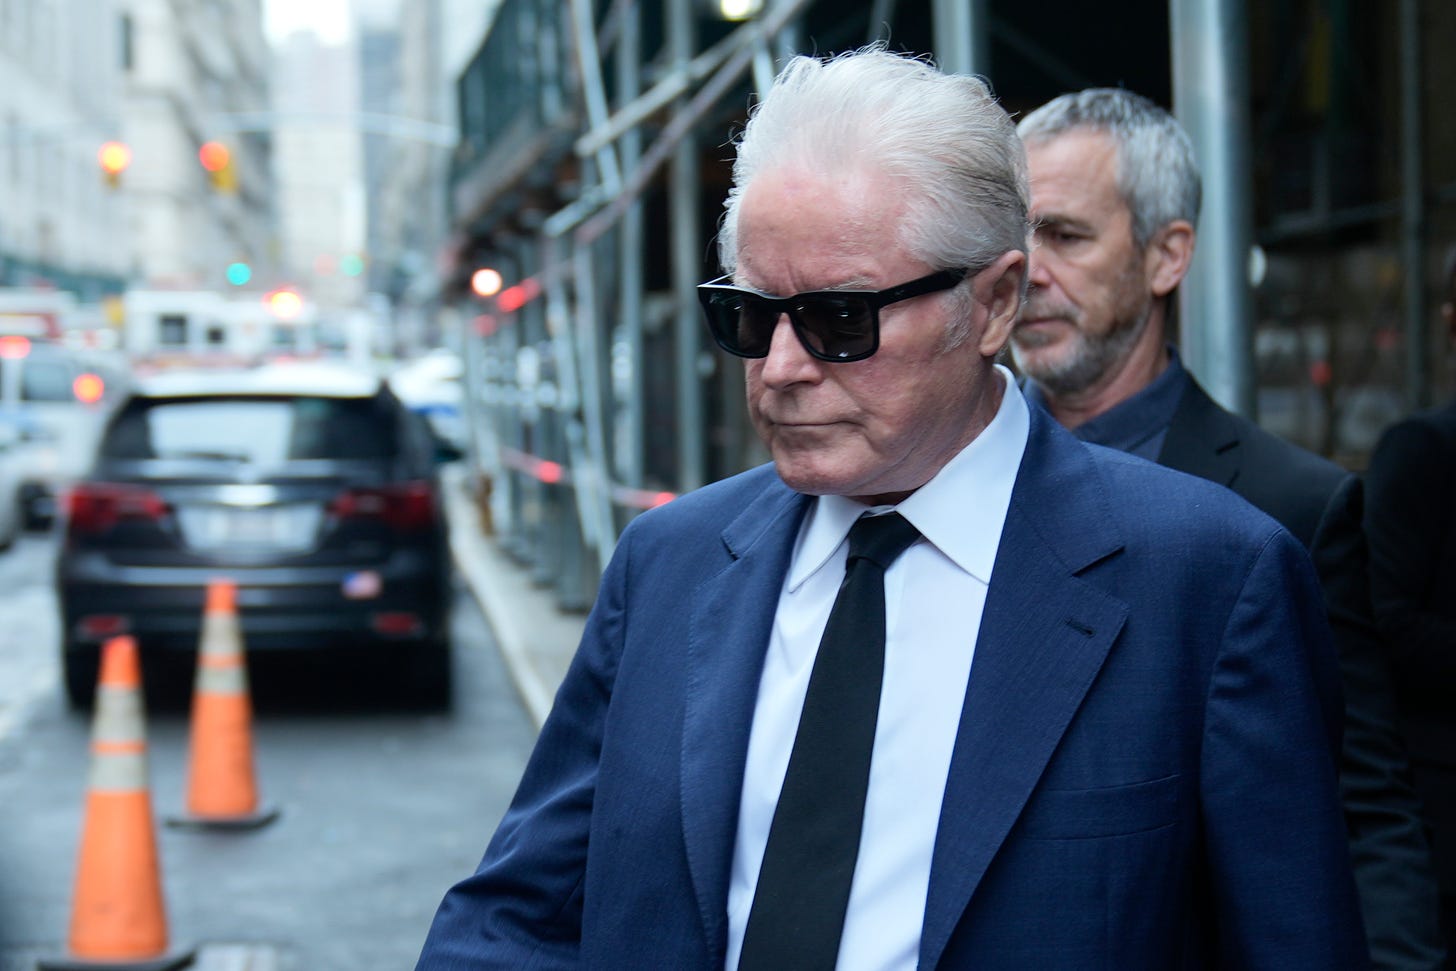 Musician Don Henley leaves the courthouse wearing sunglasses and a suit in New York.